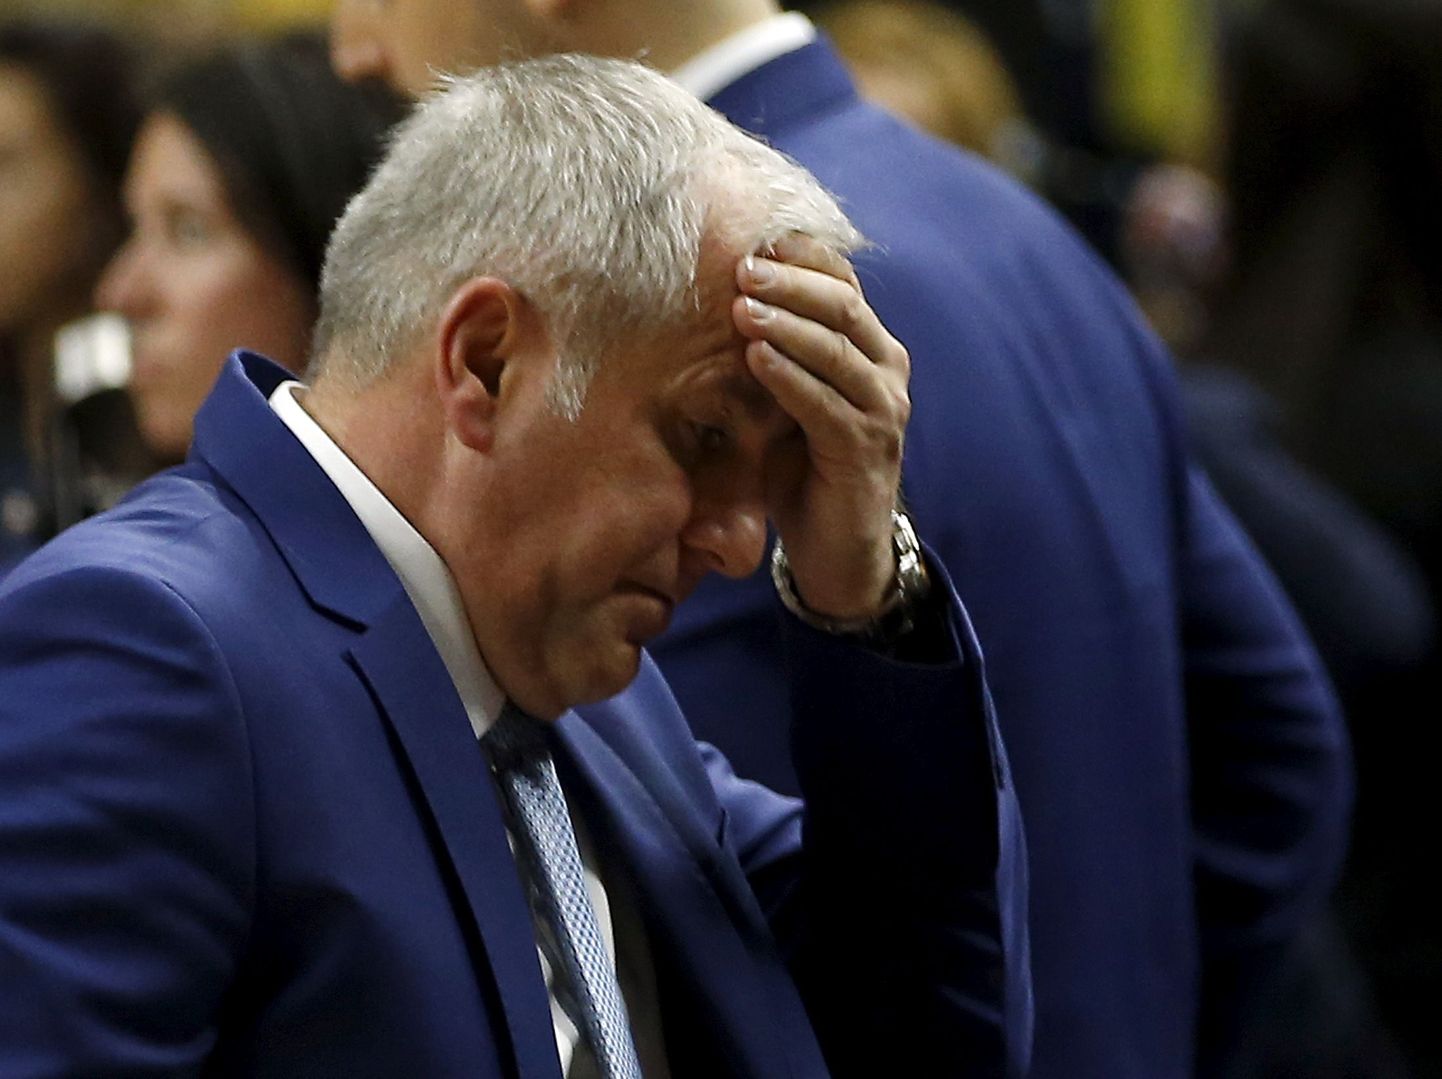 Fenerbahce's coach Zeljko Obradovic reacts as he leaves the court after their Euroleague Final Four semi-final basketball game against Real Madrid in Madrid, Spain, May 15, 2015.  REUTERS/Sergio Perez